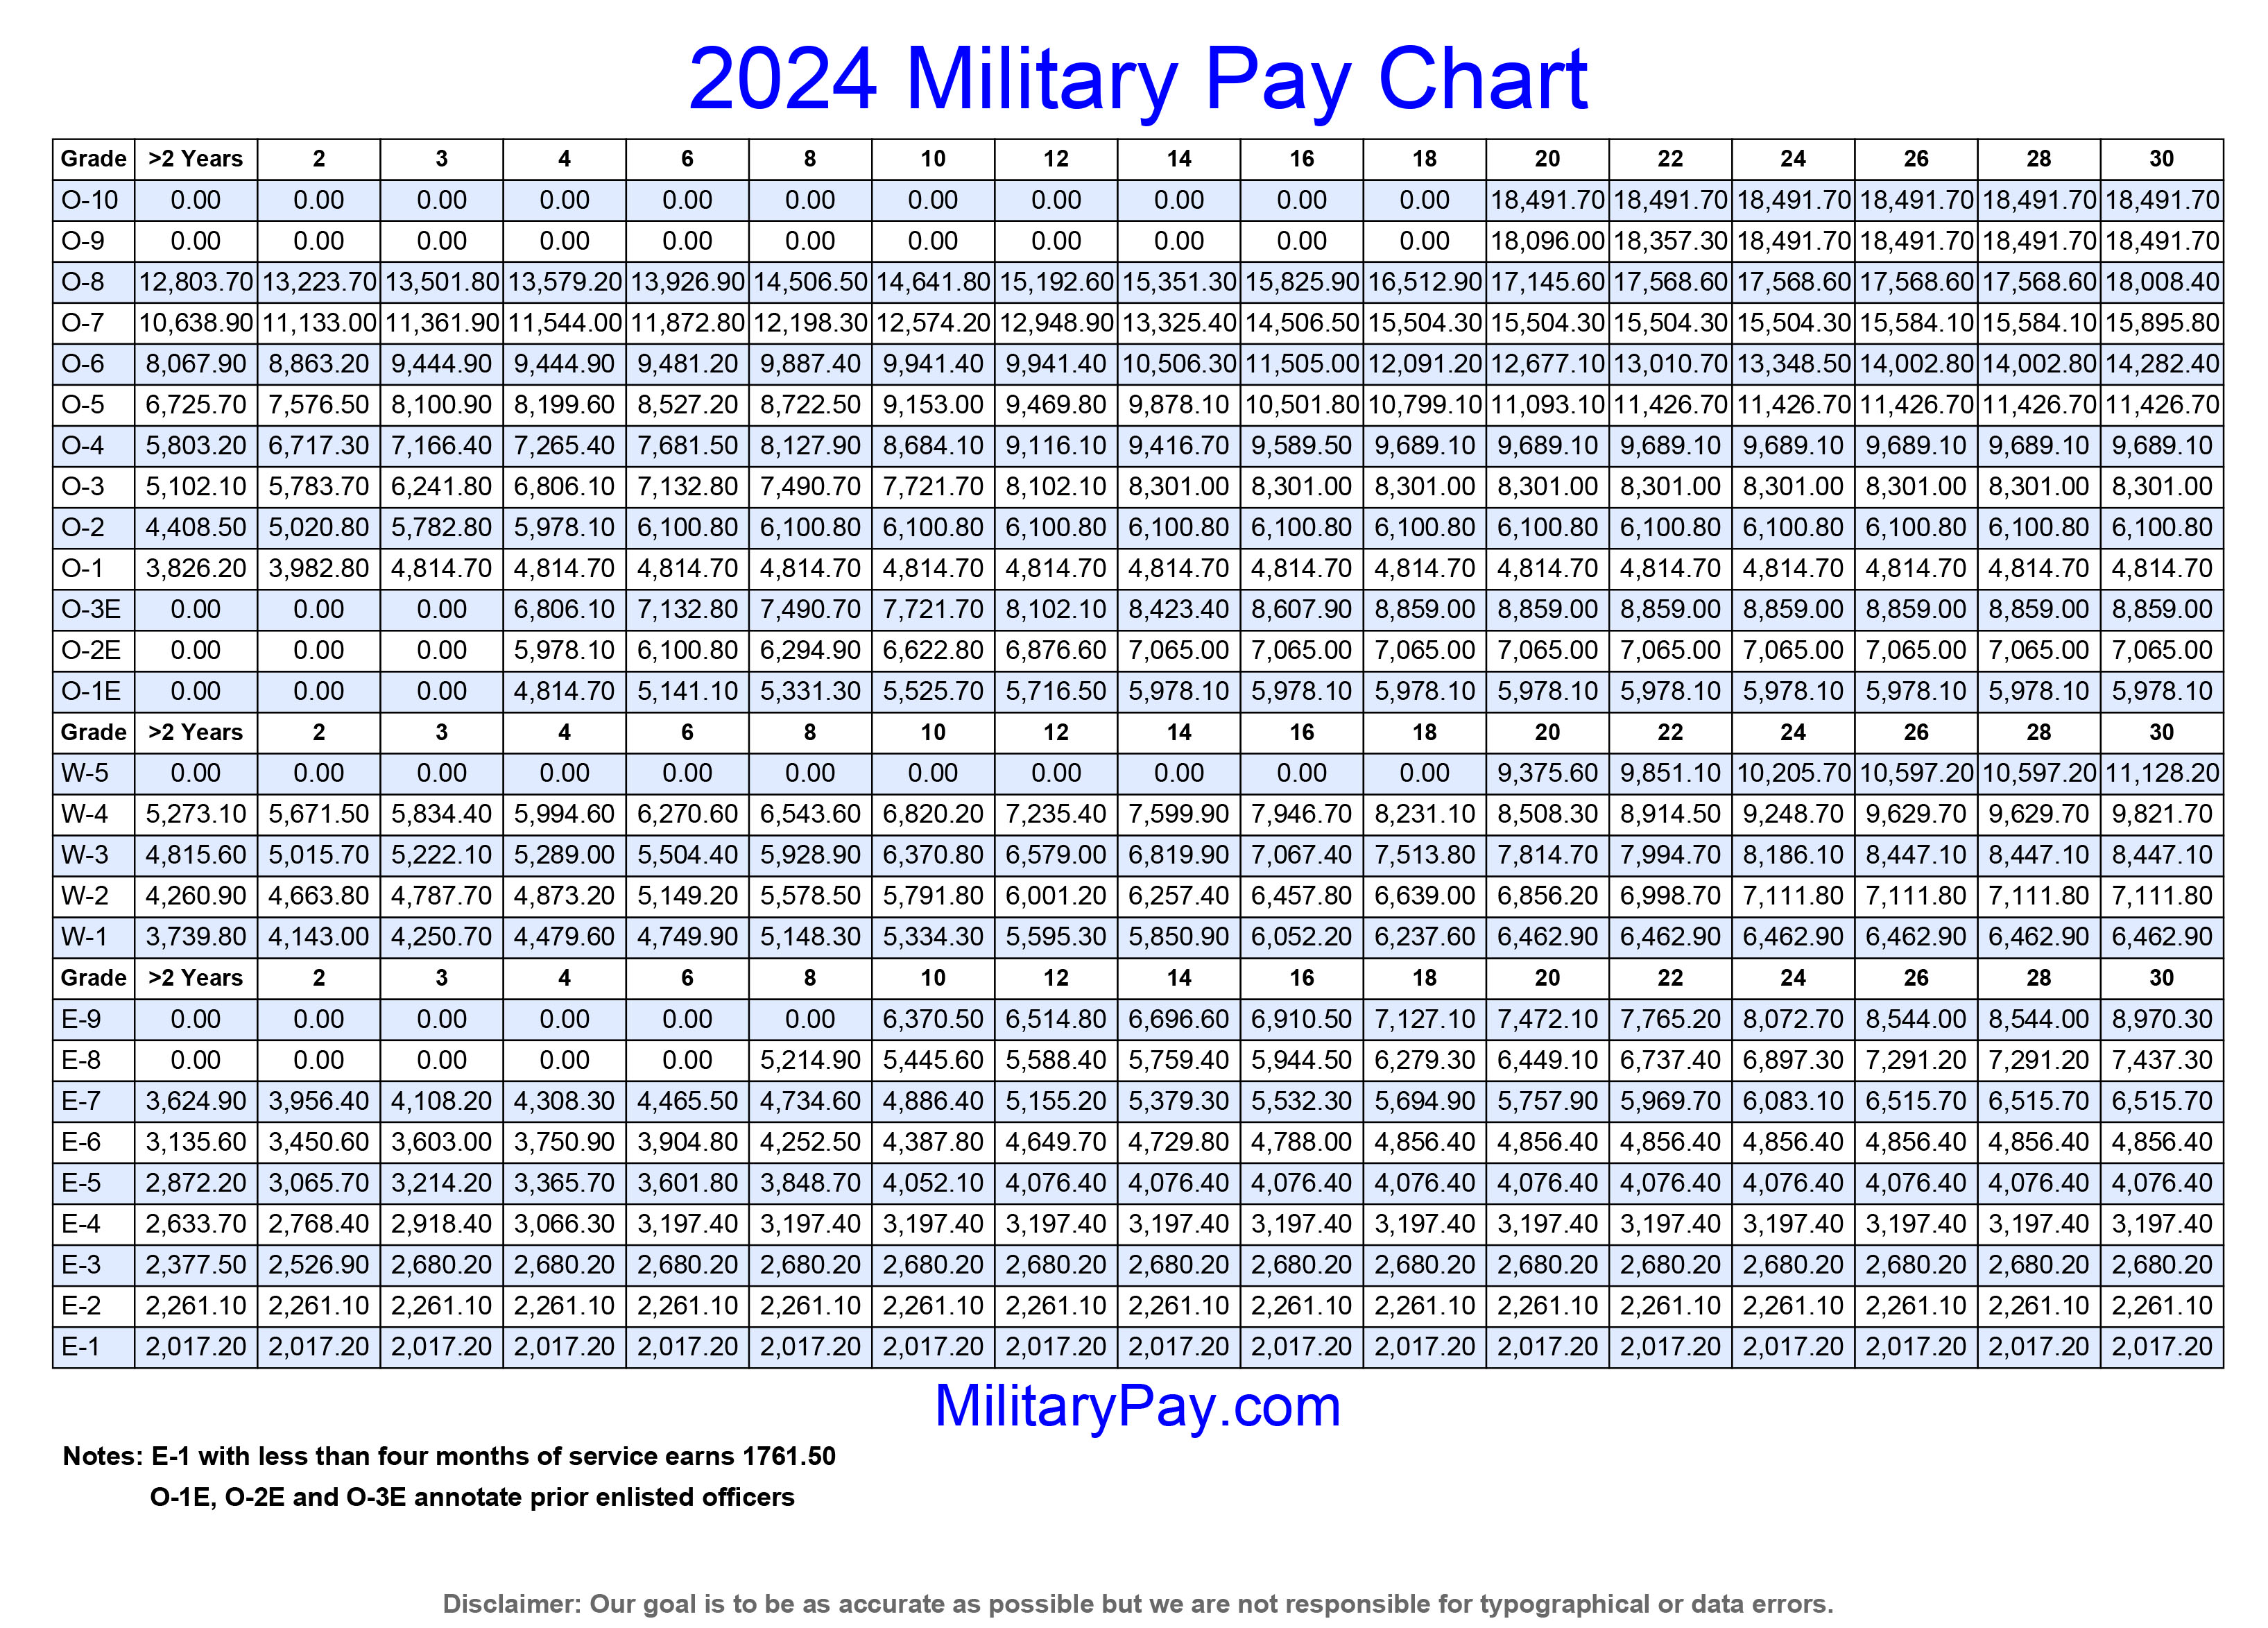 Military Pay Charts 1949 to 2024 plus estimated to 2050